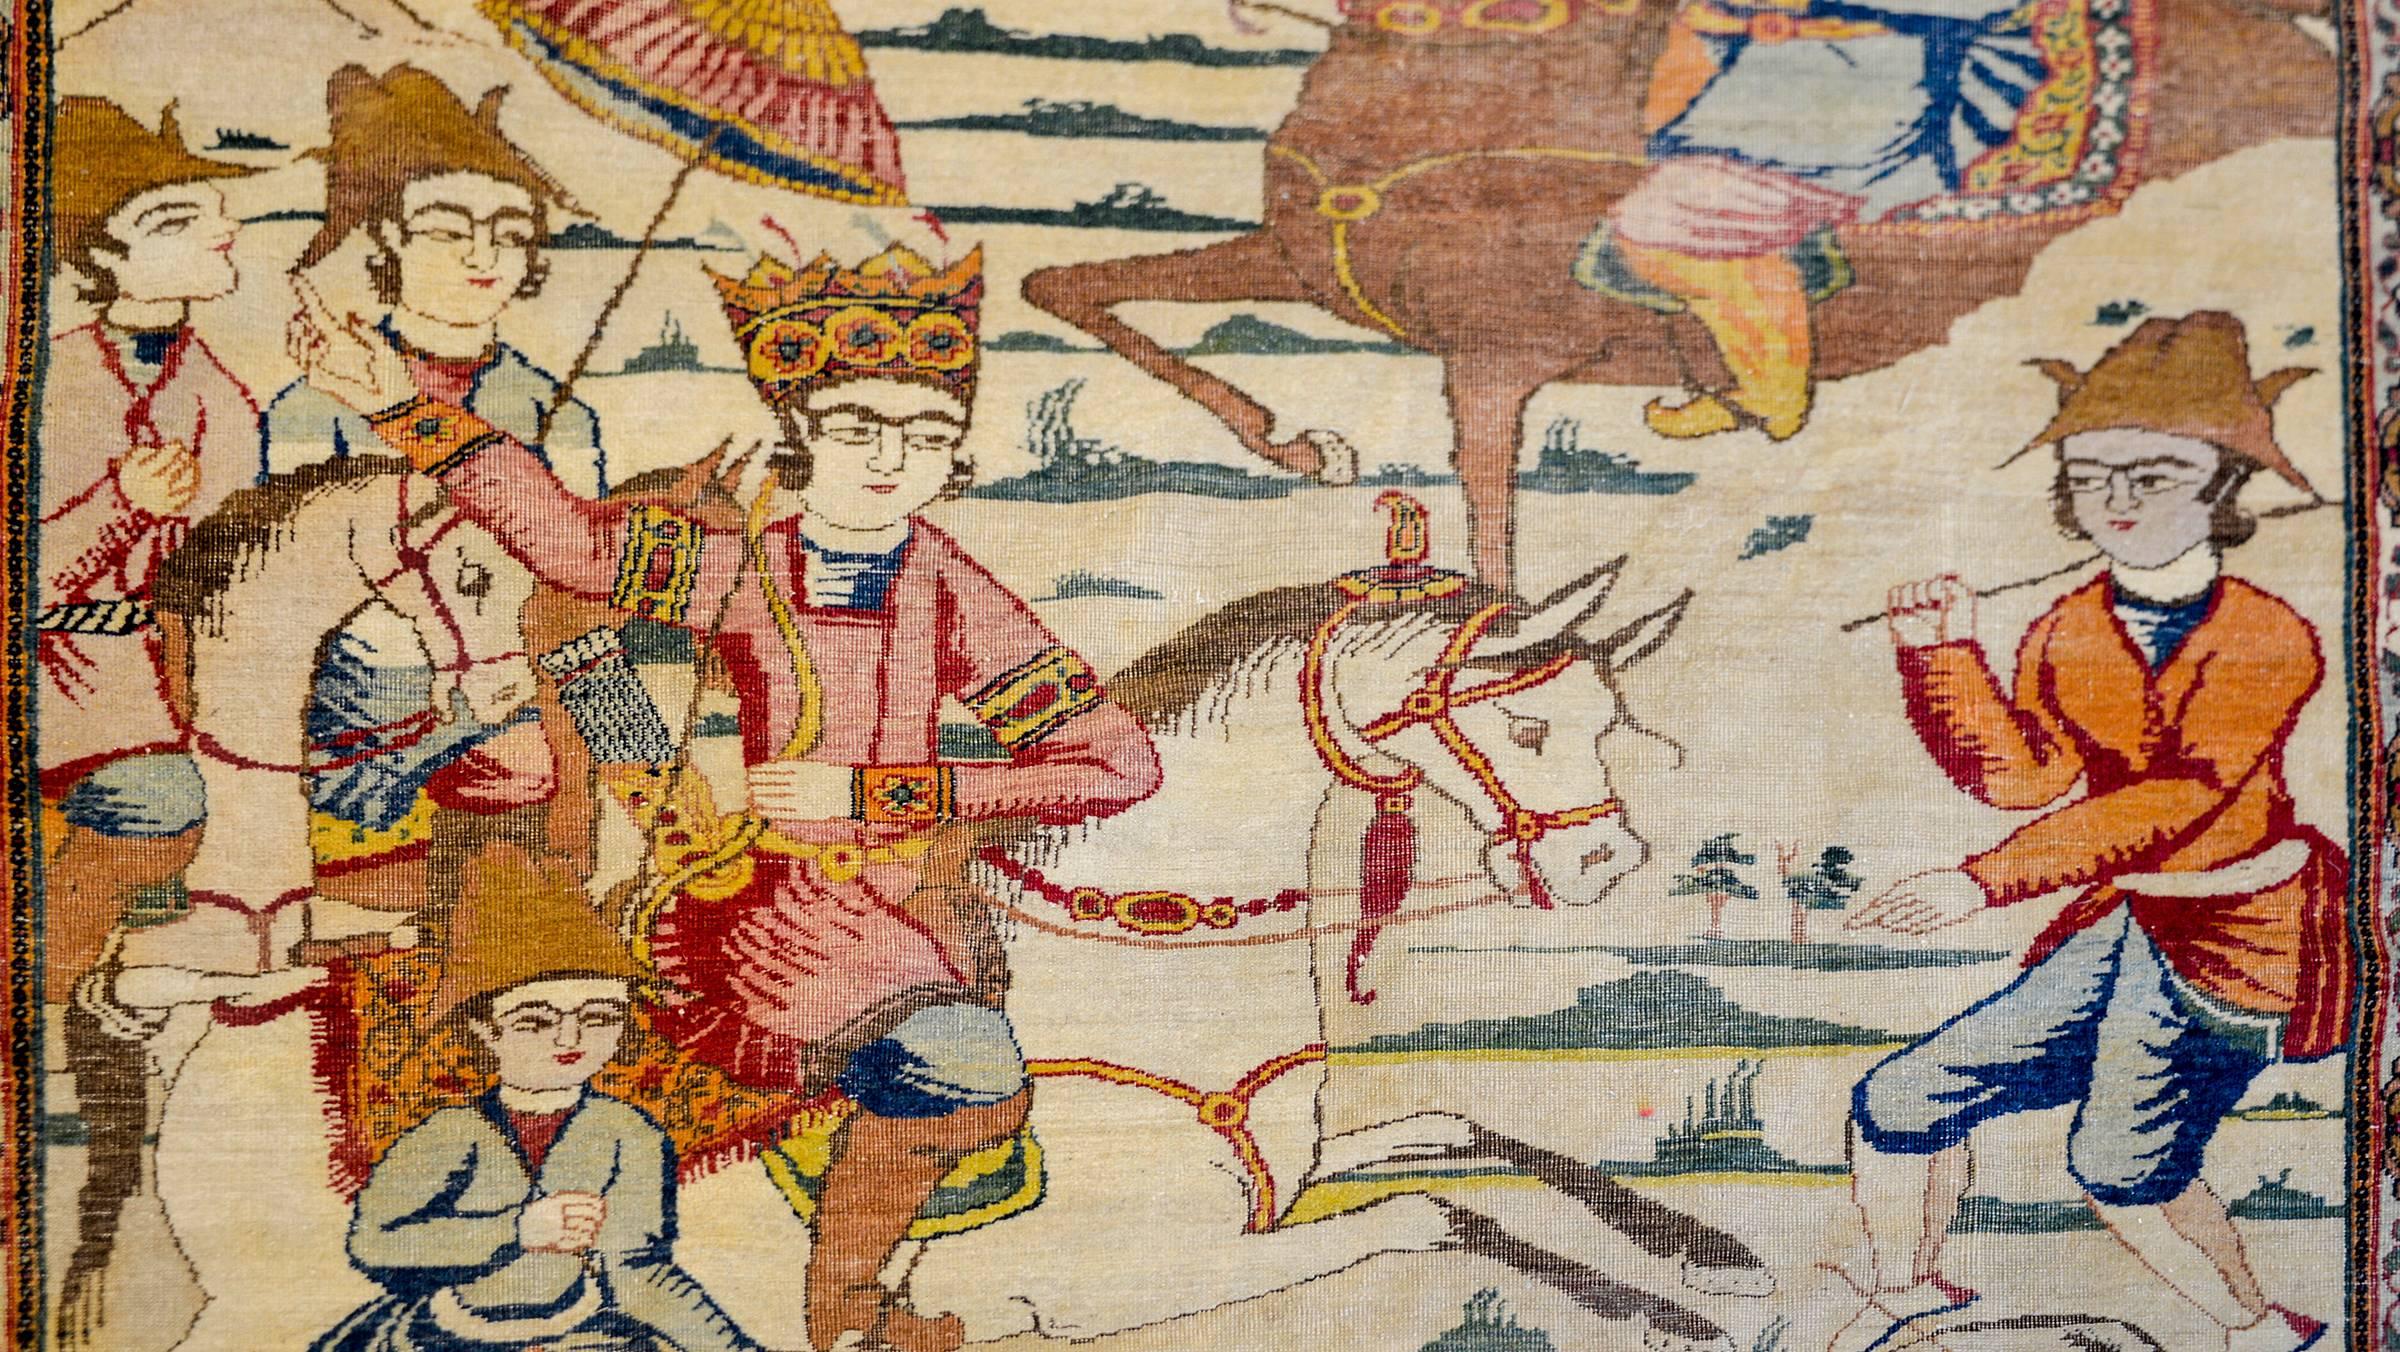 An incredibly important late 19th century Persian Pictorial Lavar Kirman rug depicting the 5th century Sassanian King, Bahram Gur, mounted on horseback and hunting a deer with bow and arrow, surrounded by several attendants. The rendering is